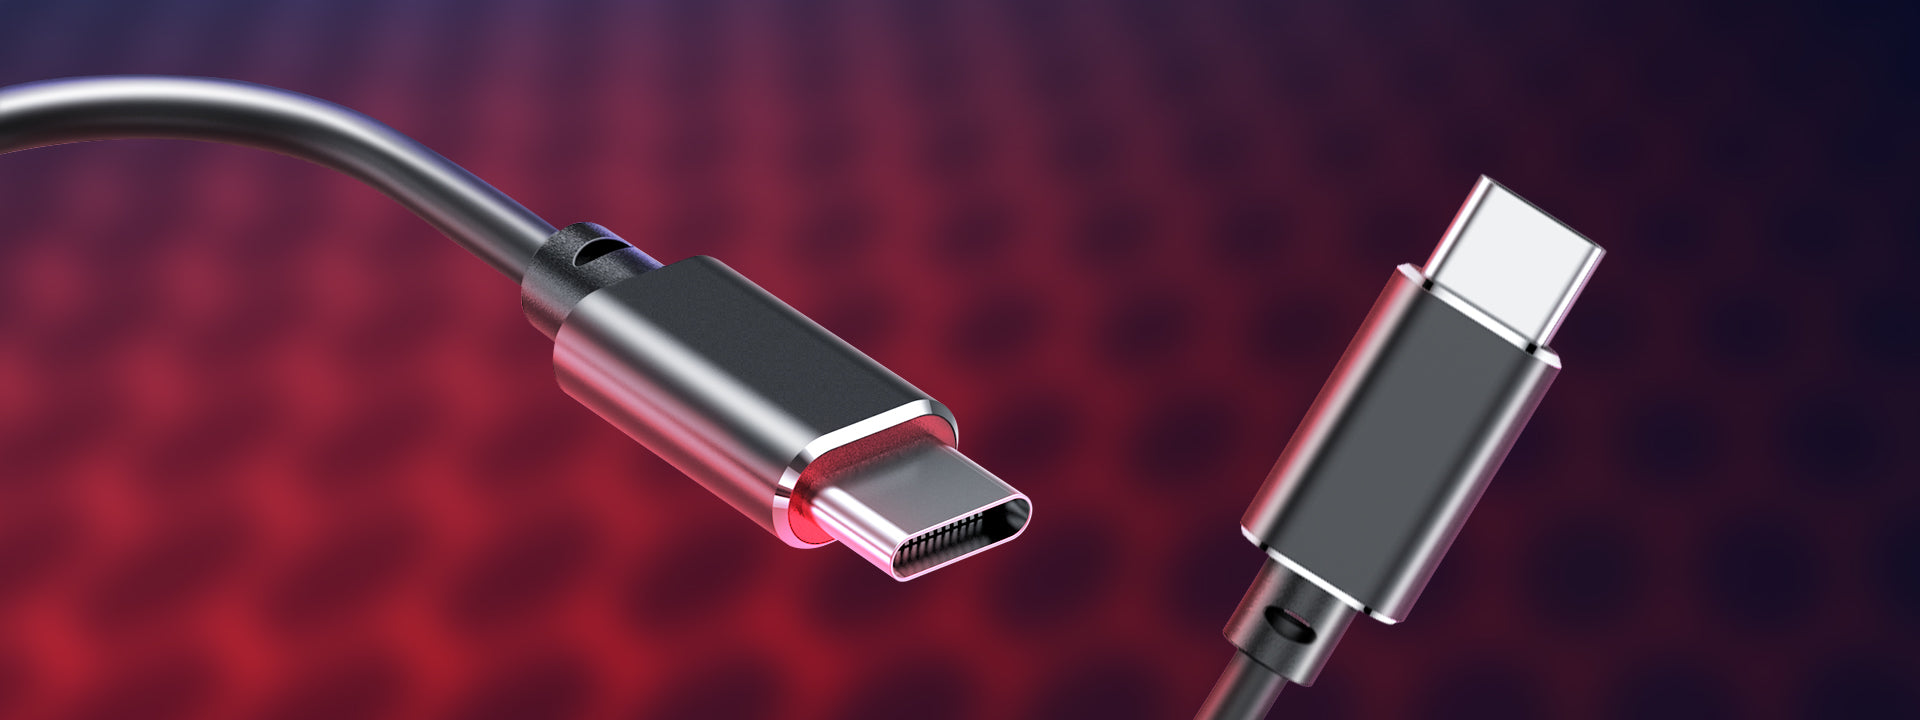 A Basic Guide to USB-C Explained and How It Works